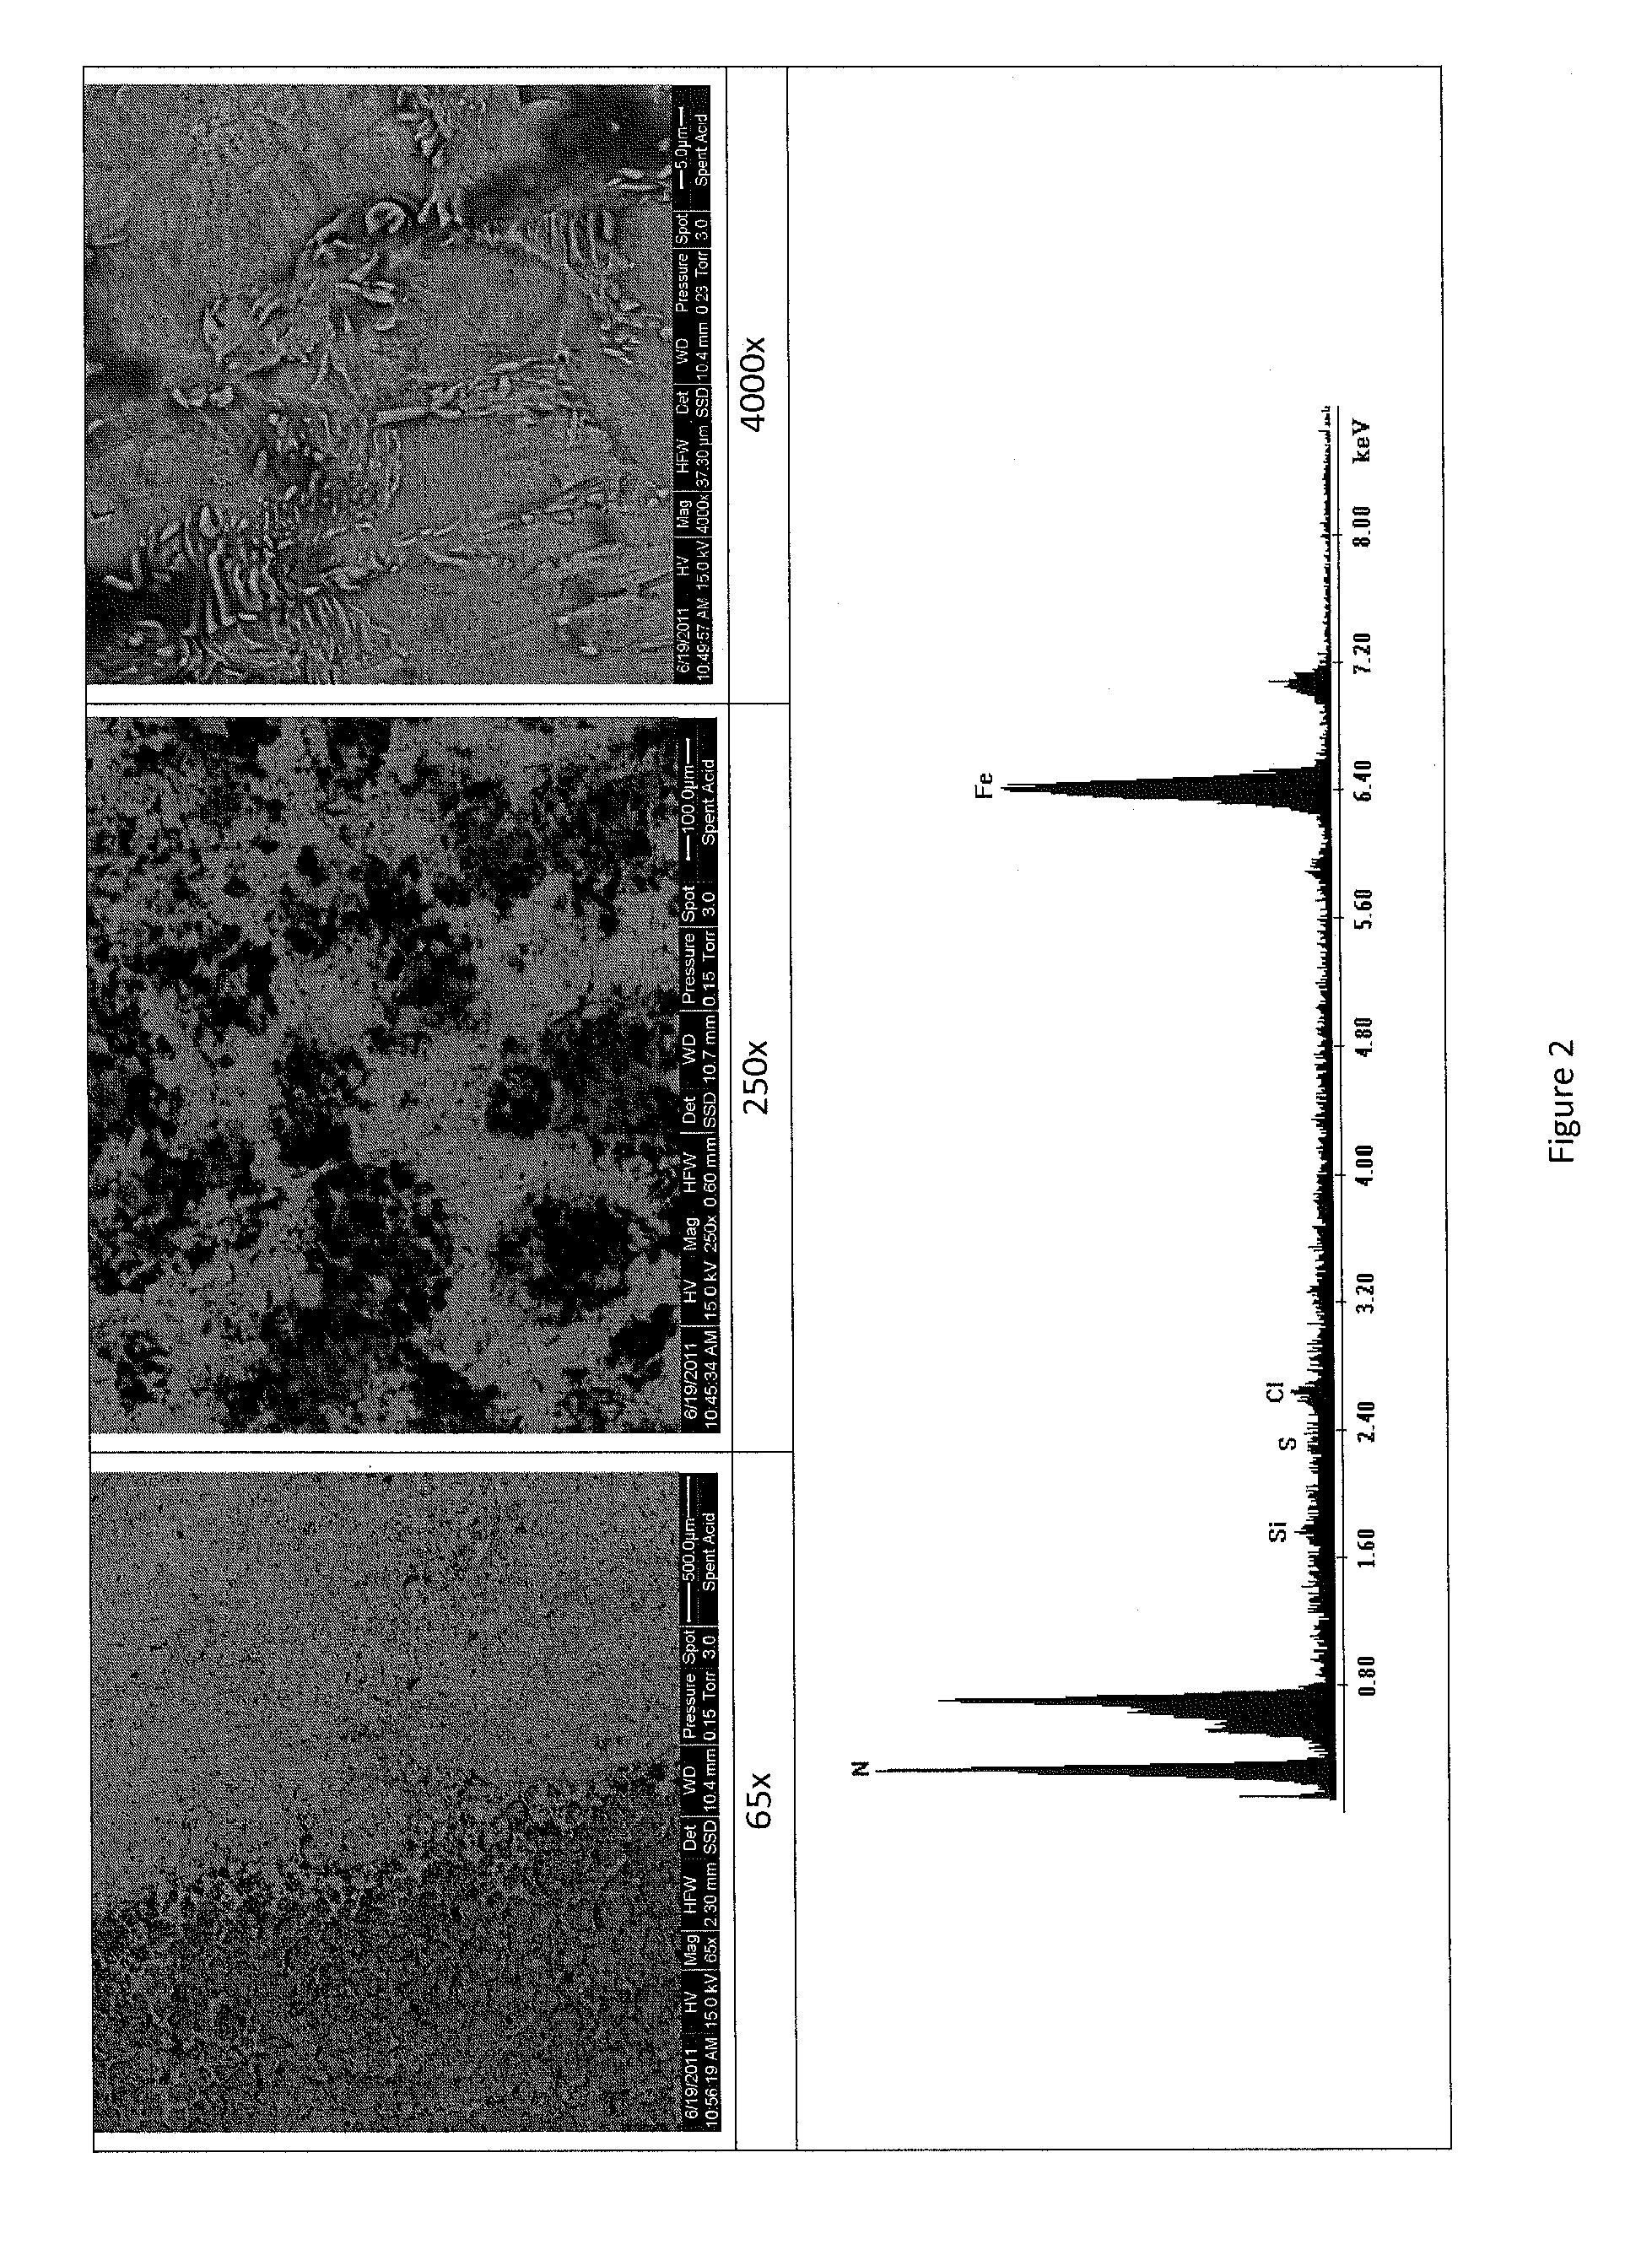 Dual-phase acid-based fracturing composition with corrosion inhibitors and method of use thereof